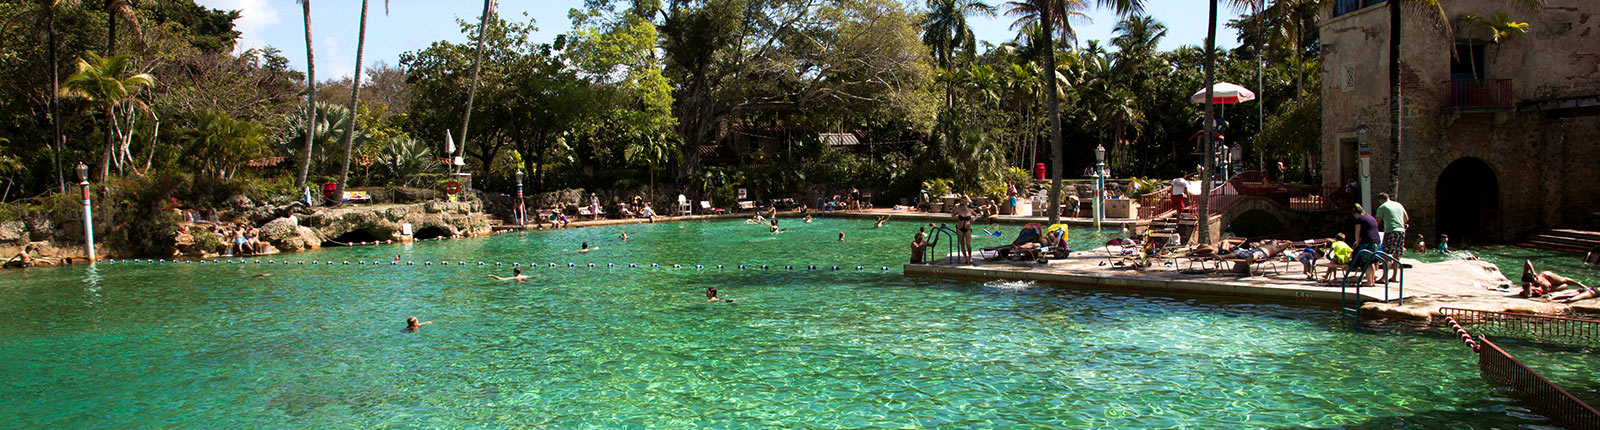 Tranquil and beautiful setting of the Venetian Pool in Miami, FL